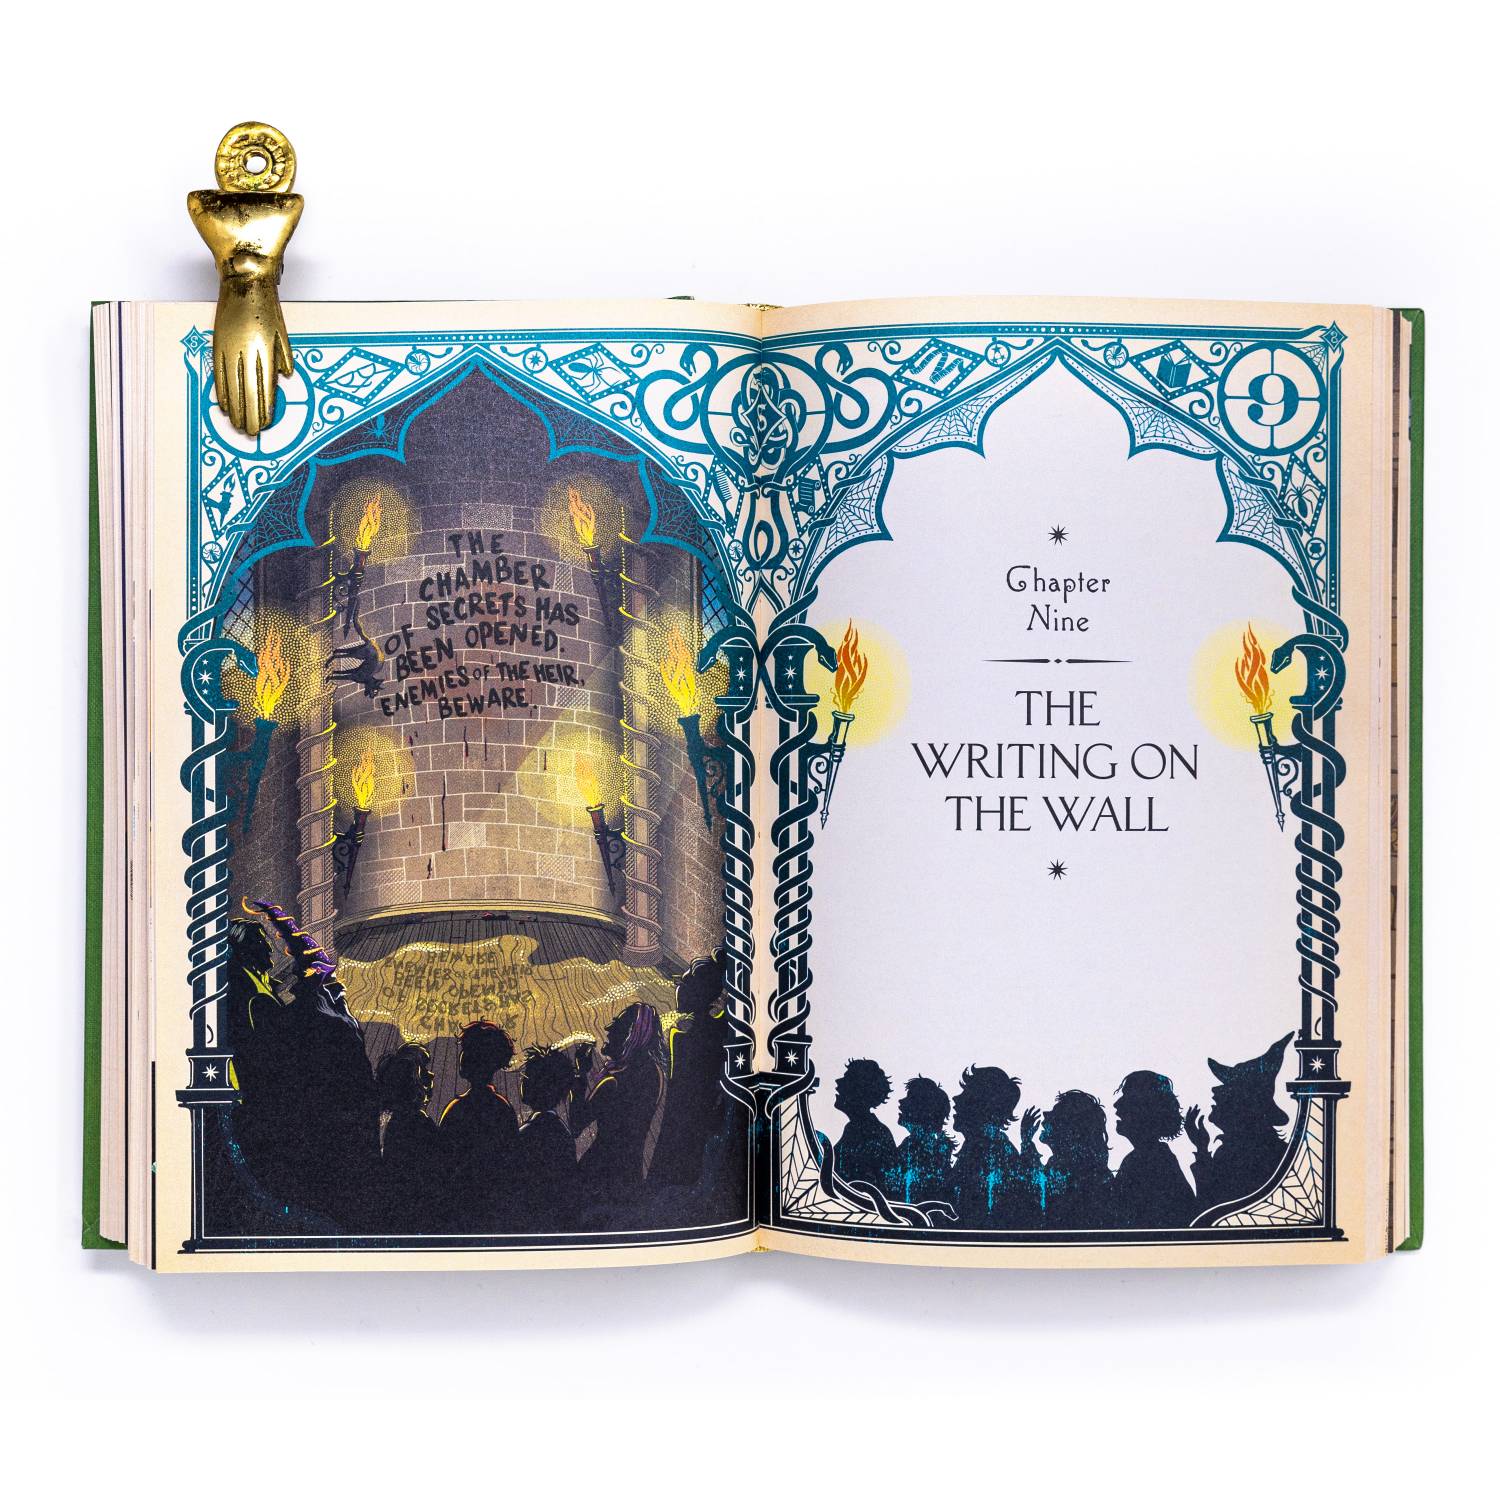 Harry Potter and the Chamber of Secrets, MinaLima edition, D&AD Awards  2022 Shortlist, Illustrated Books & Graphic Novels